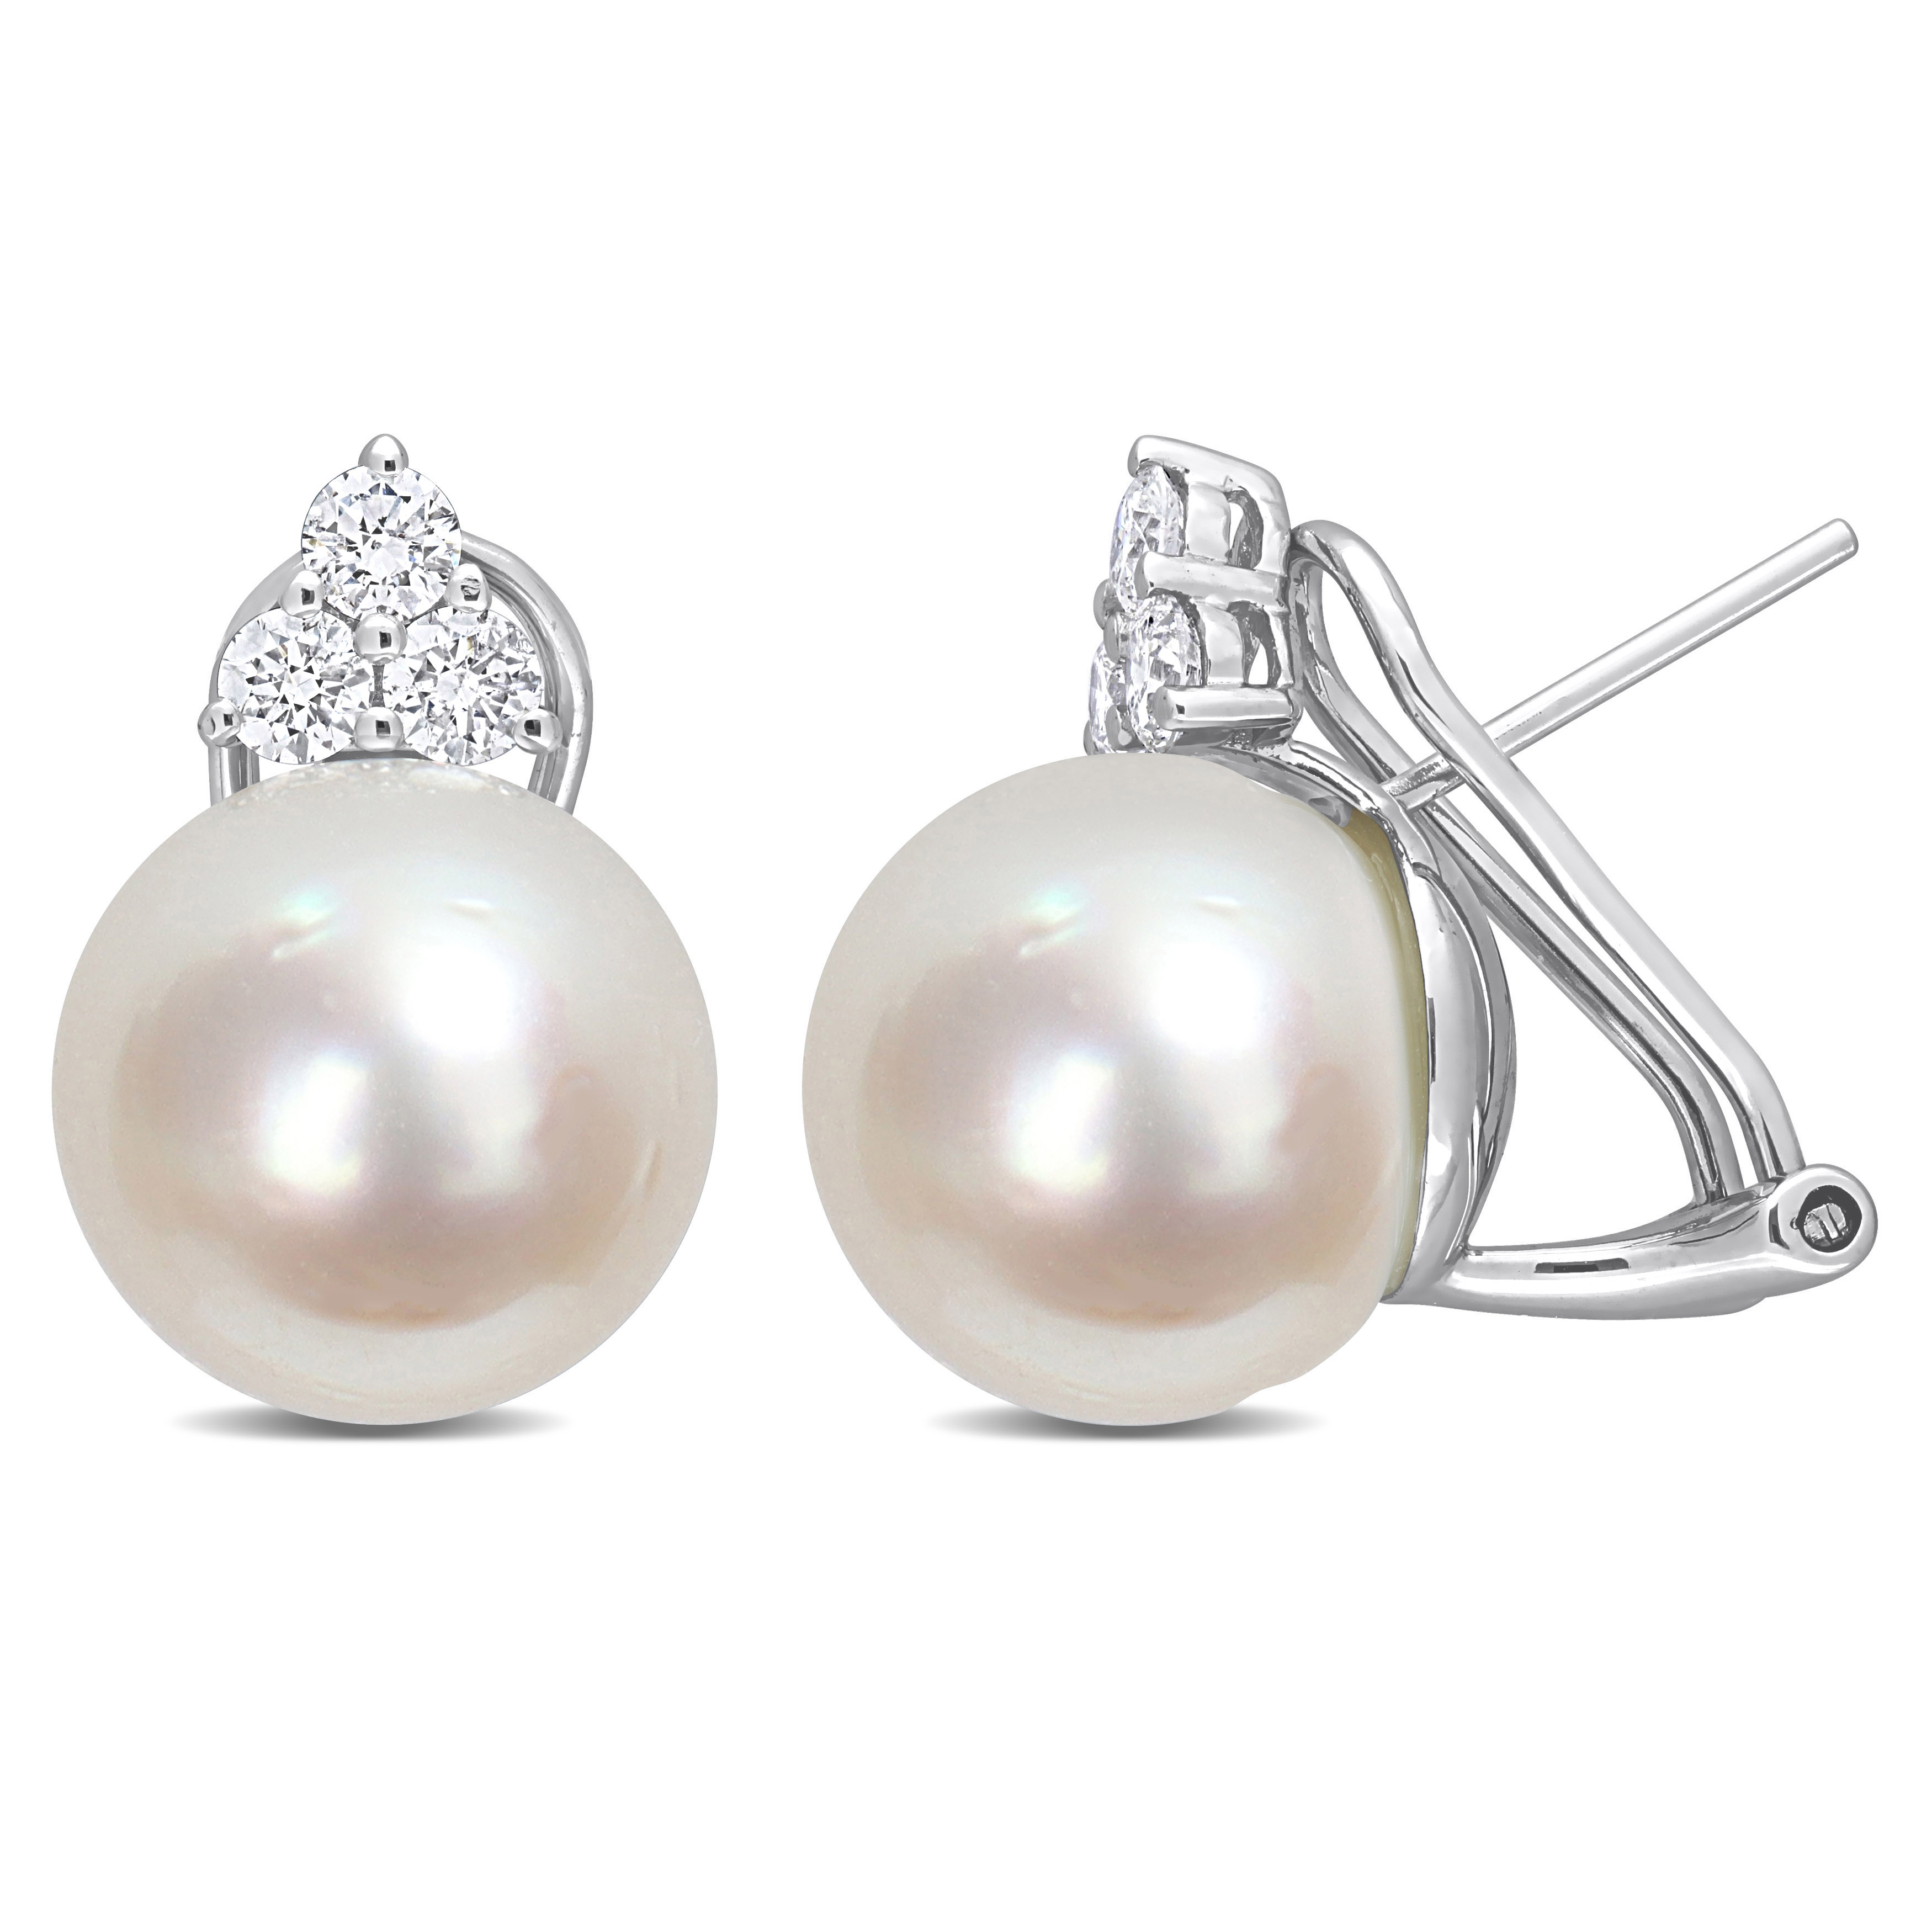 12-12.5mm South Sea Cultured Pearl and 5/8 CT TW Diamond Clip-Back Earrings in 14k White Gold